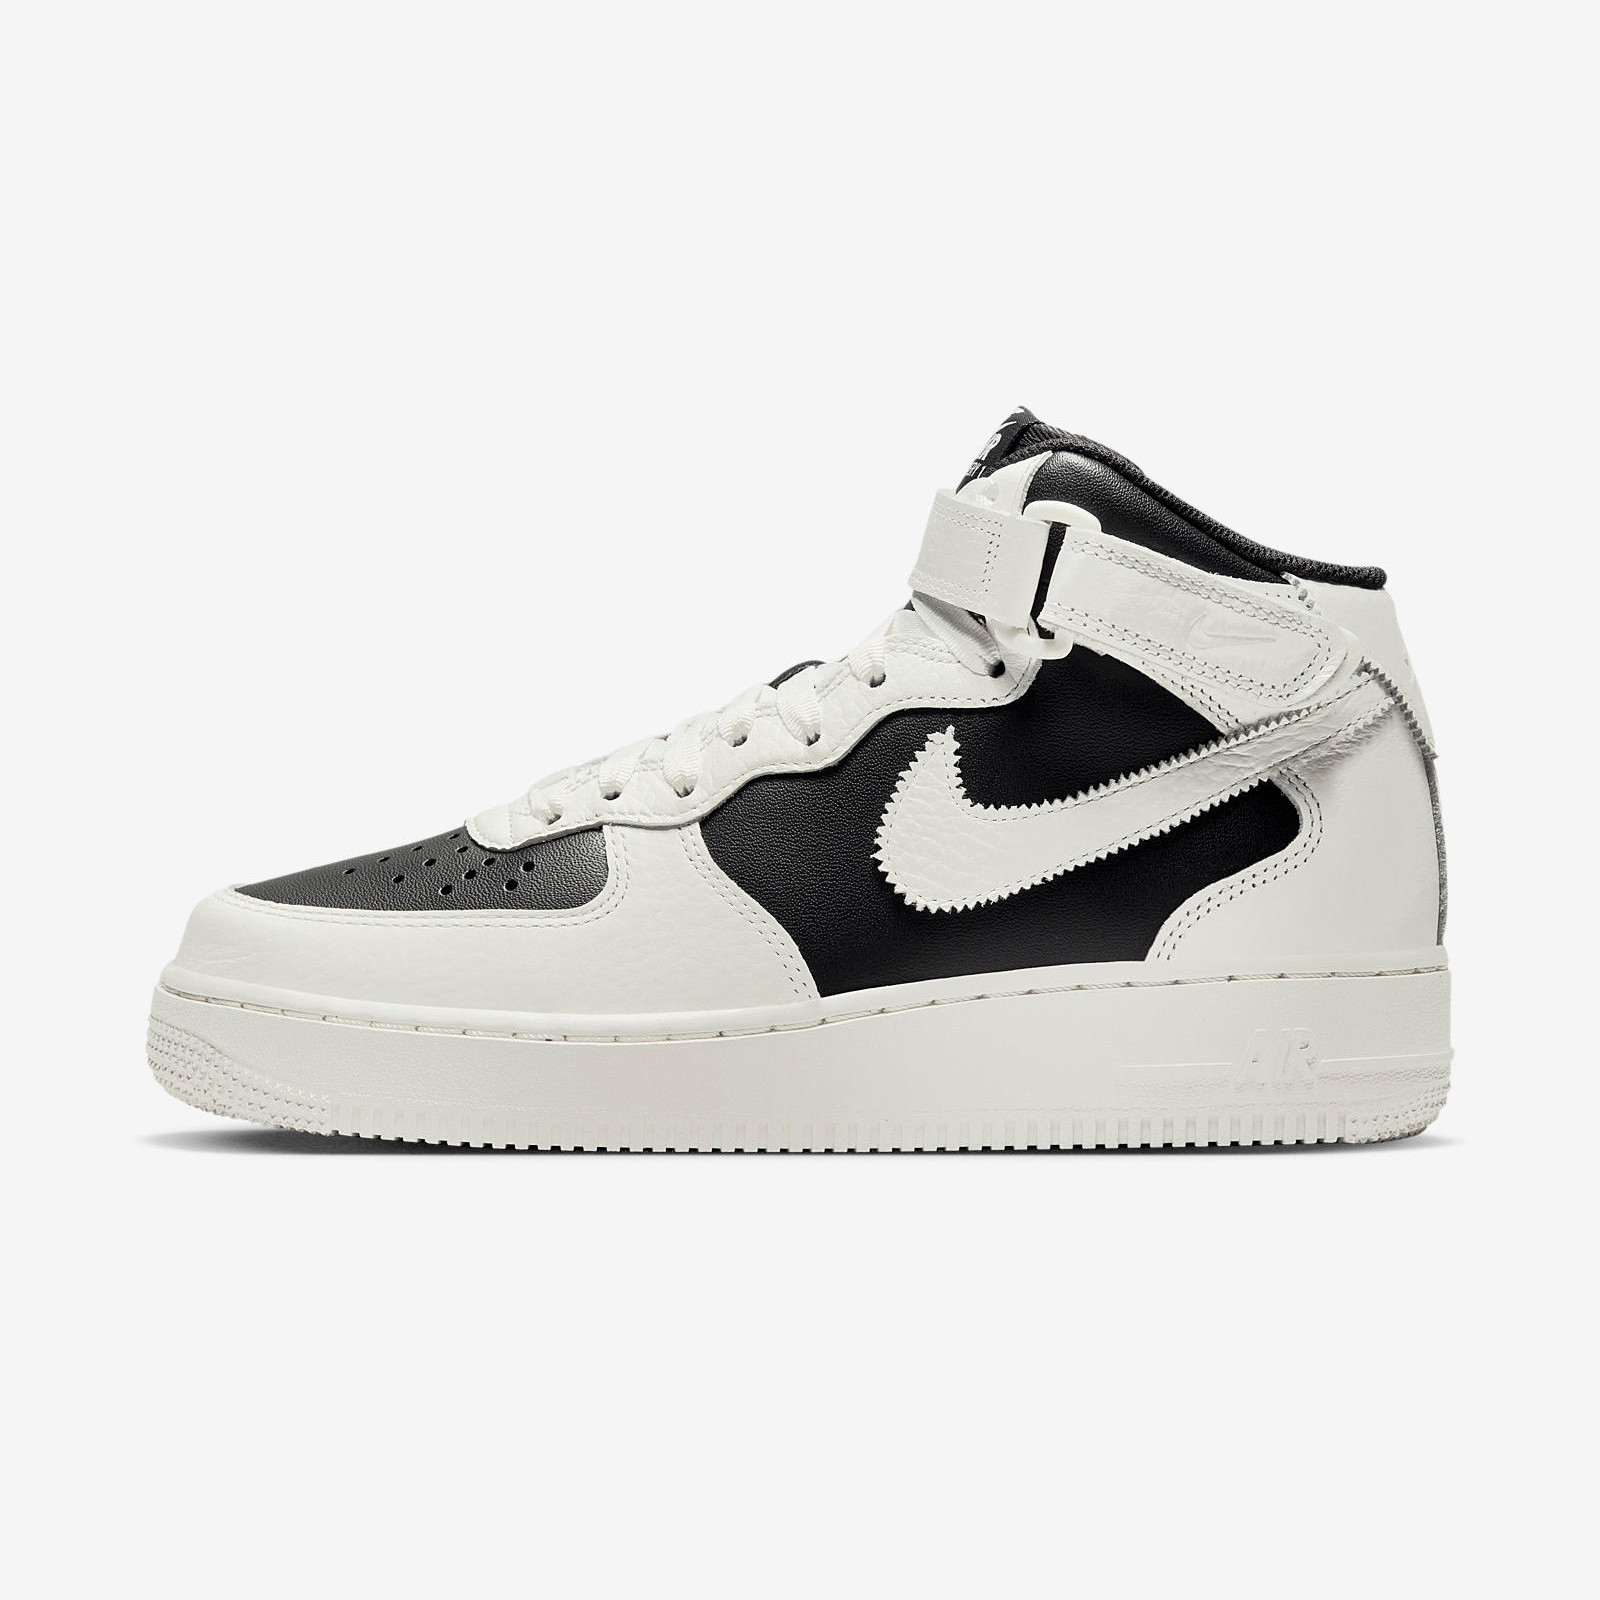 Nike Air Force 1 Mid
« Every 1 »